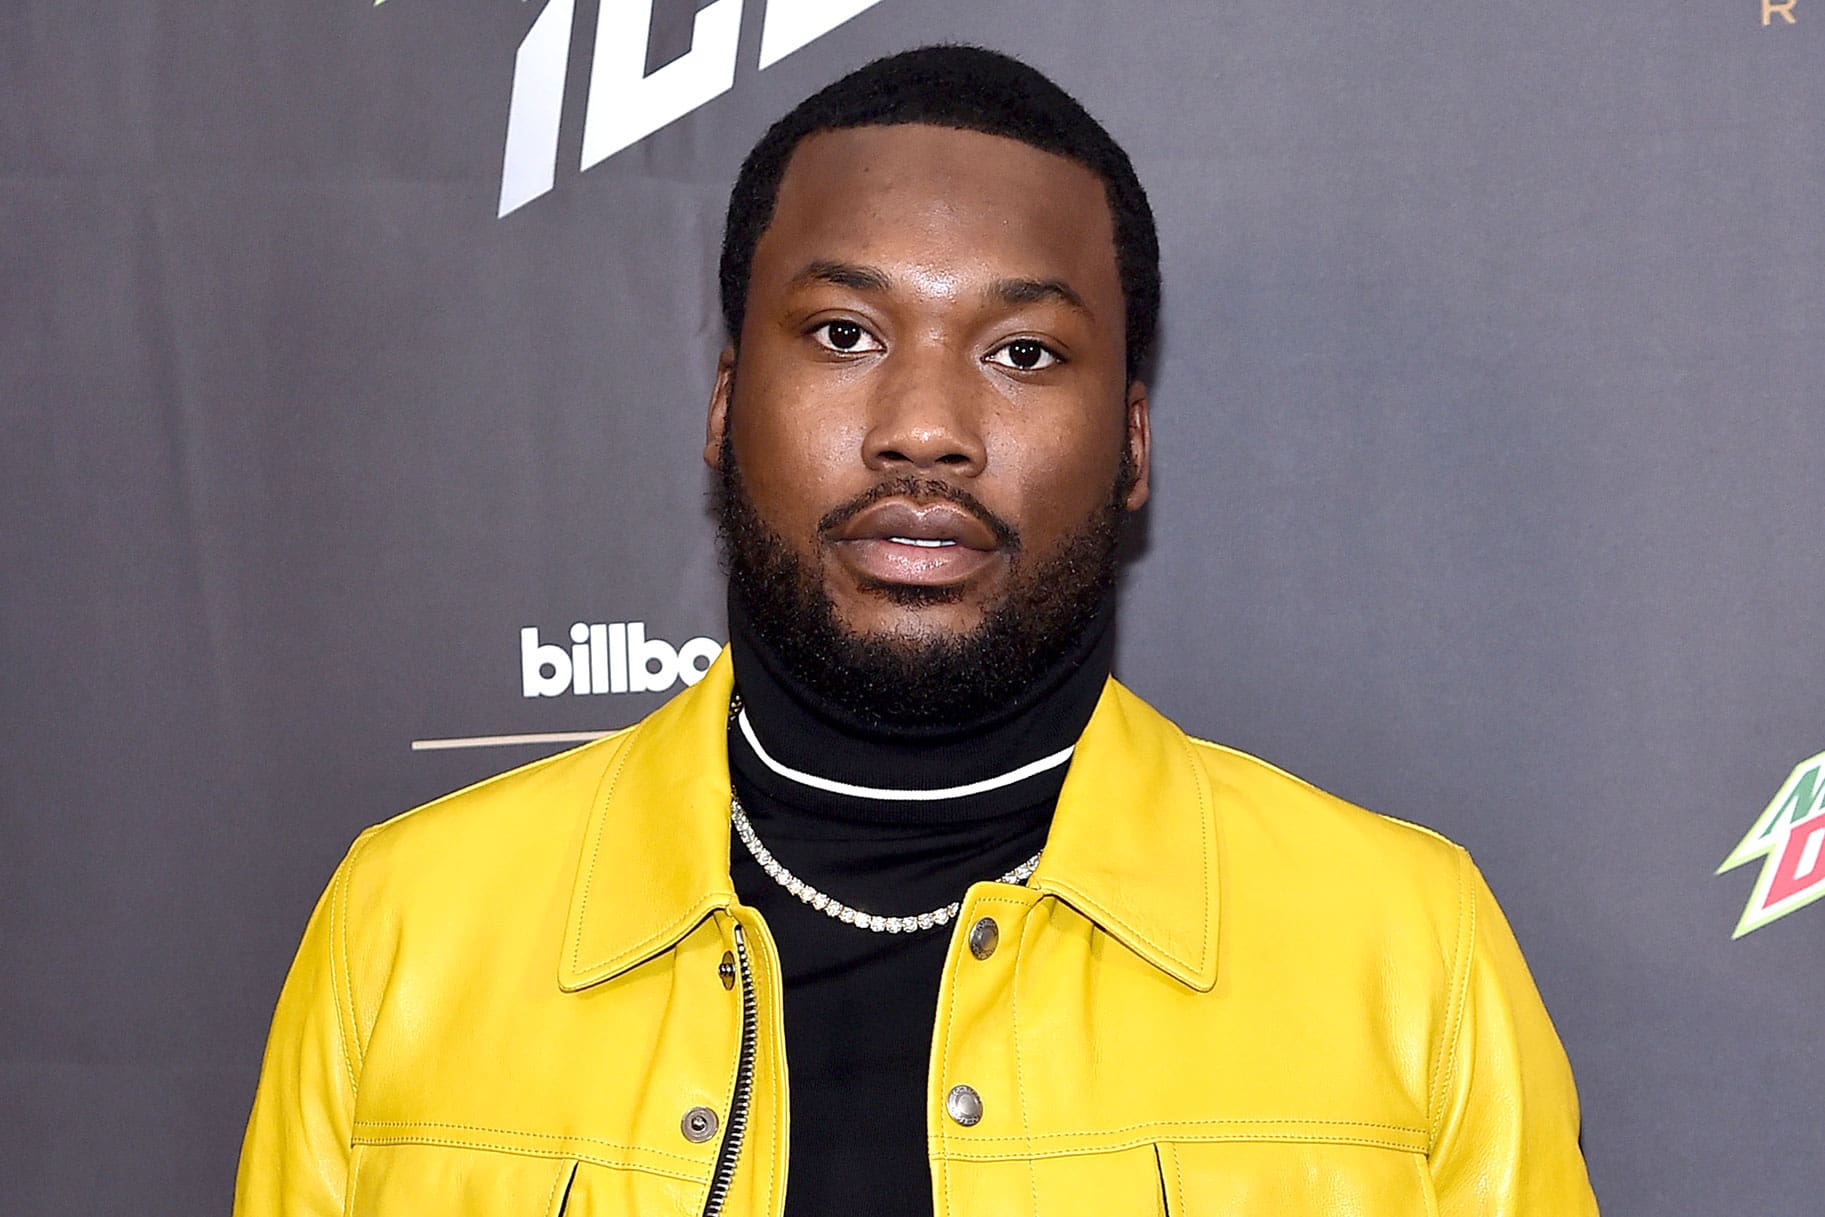 Meek Mill's Breakup Announcement Has Fans Laughing Their Hearts Out